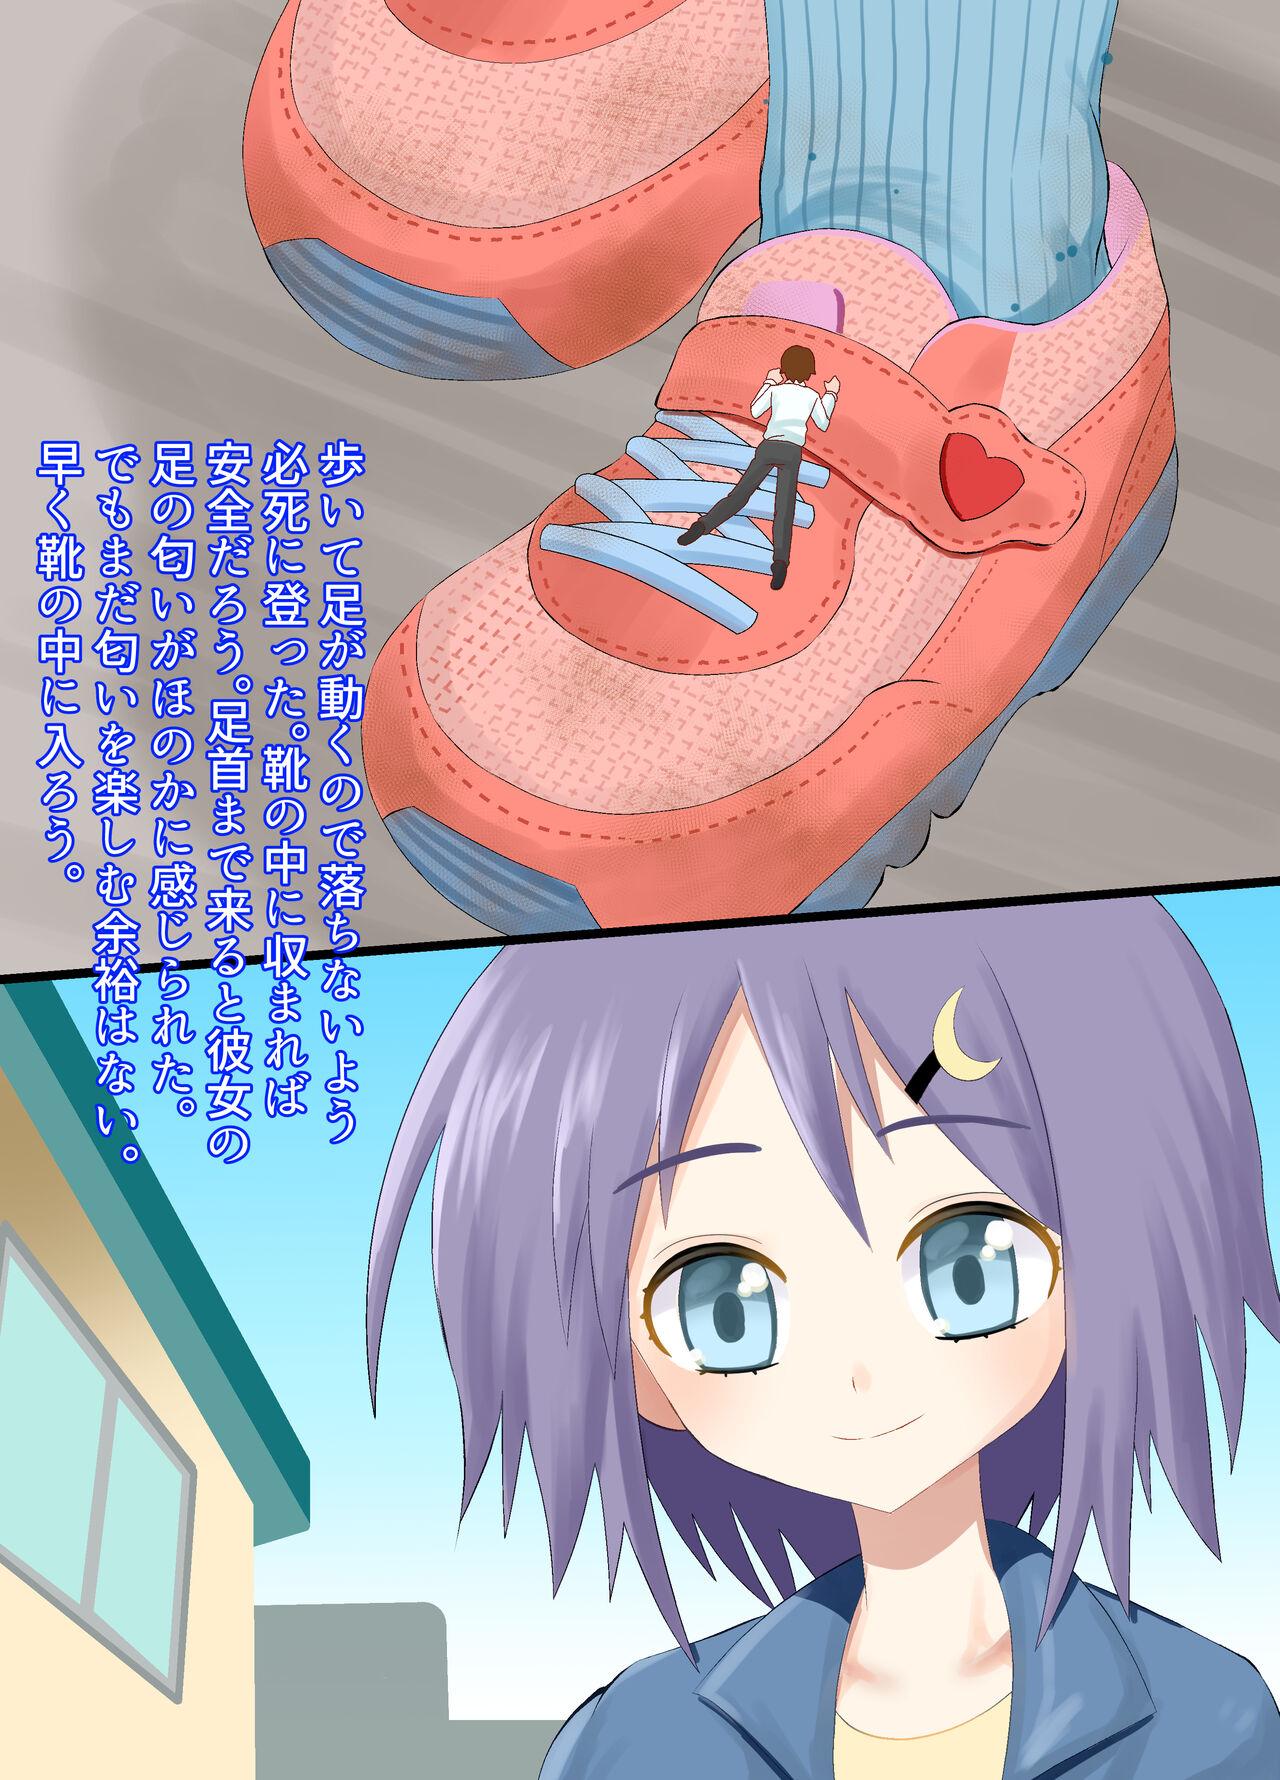 Facebook A CG collection of getting smaller and being stepped on by a girl - Original Cavalgando - Page 6